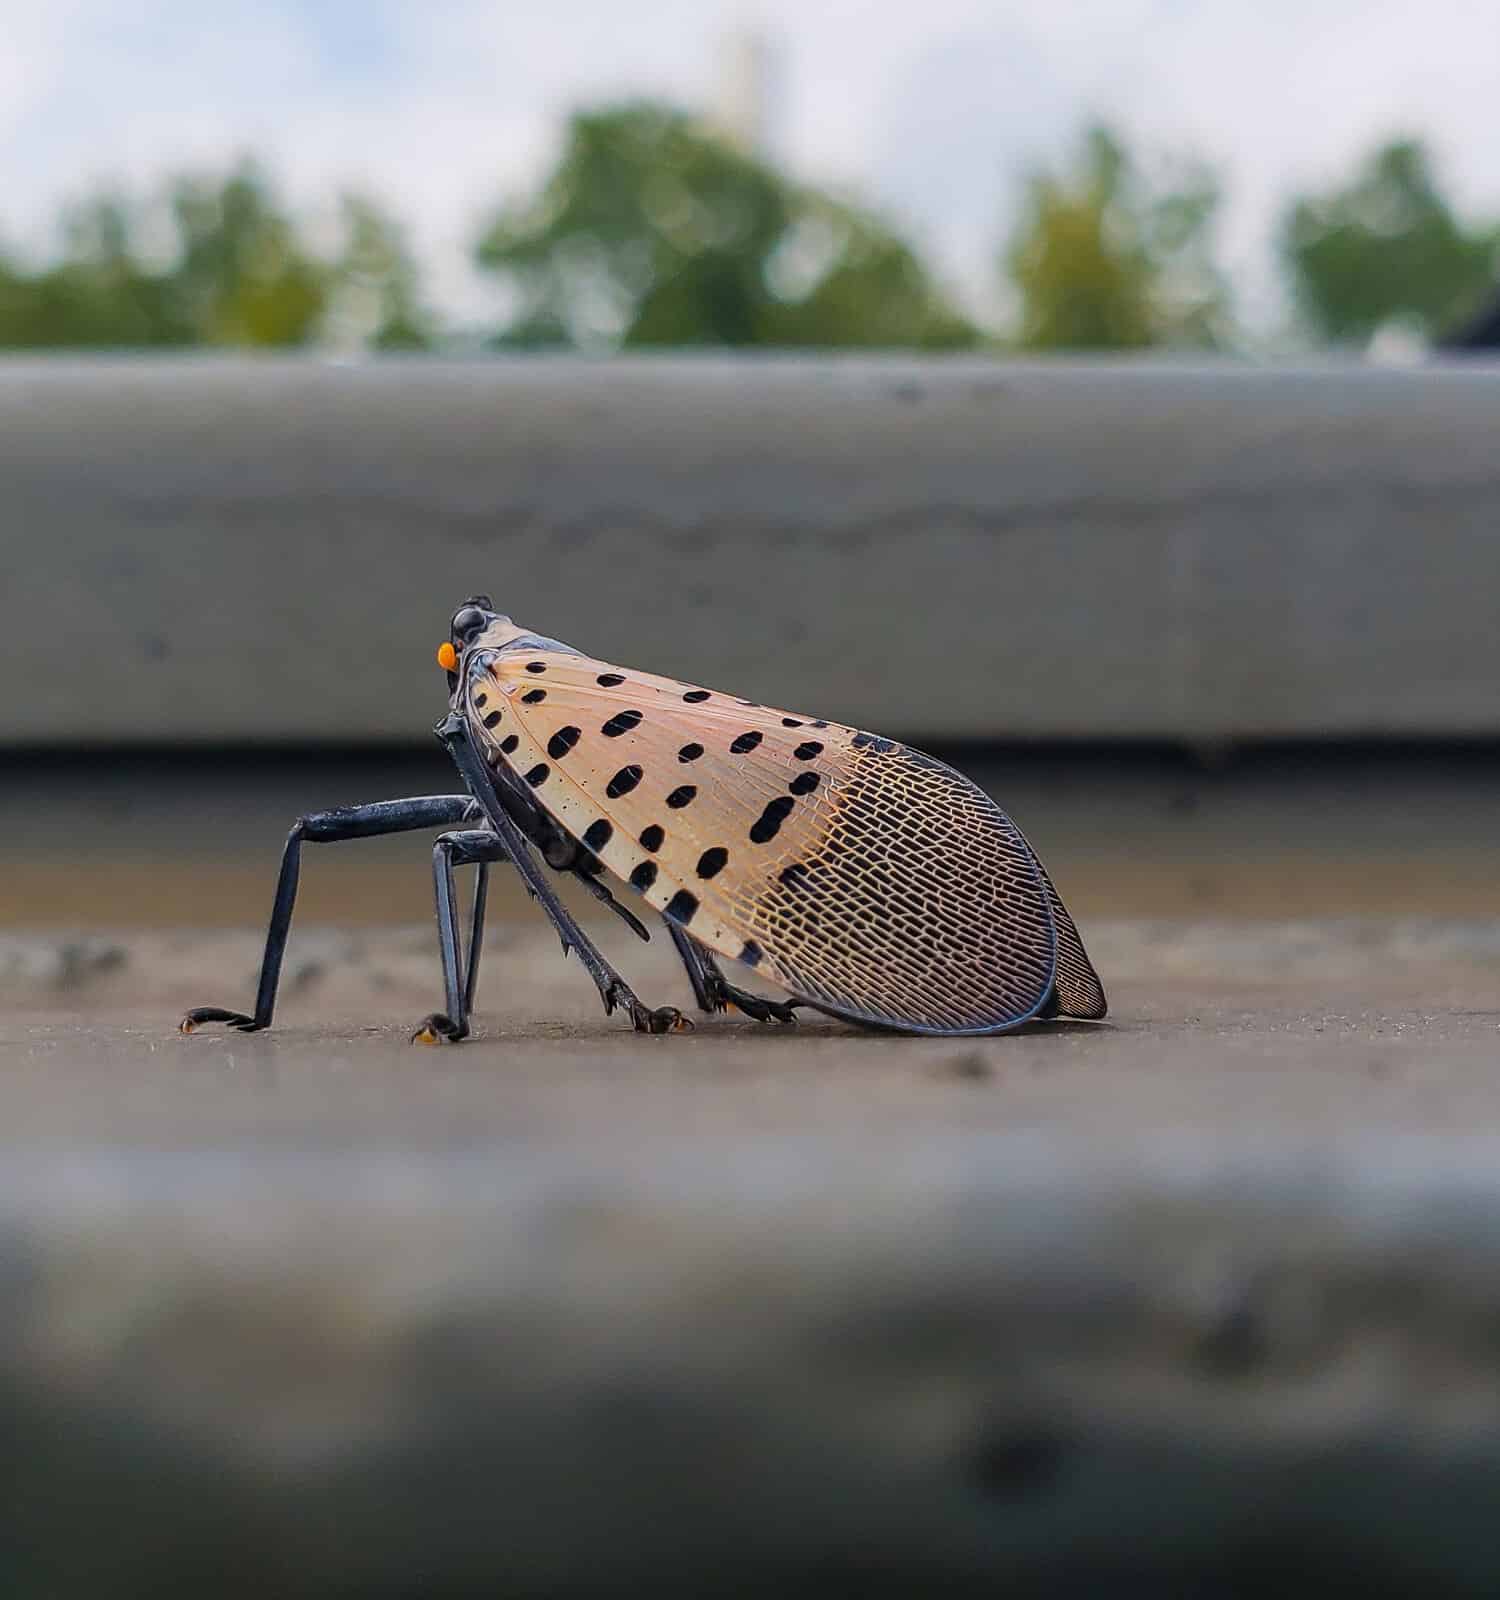 Adult Spotted Laternfly photographed in Pennsylvania.  This insect is from Asia and is considered invasive and highly damaging to agriculture in the United States.